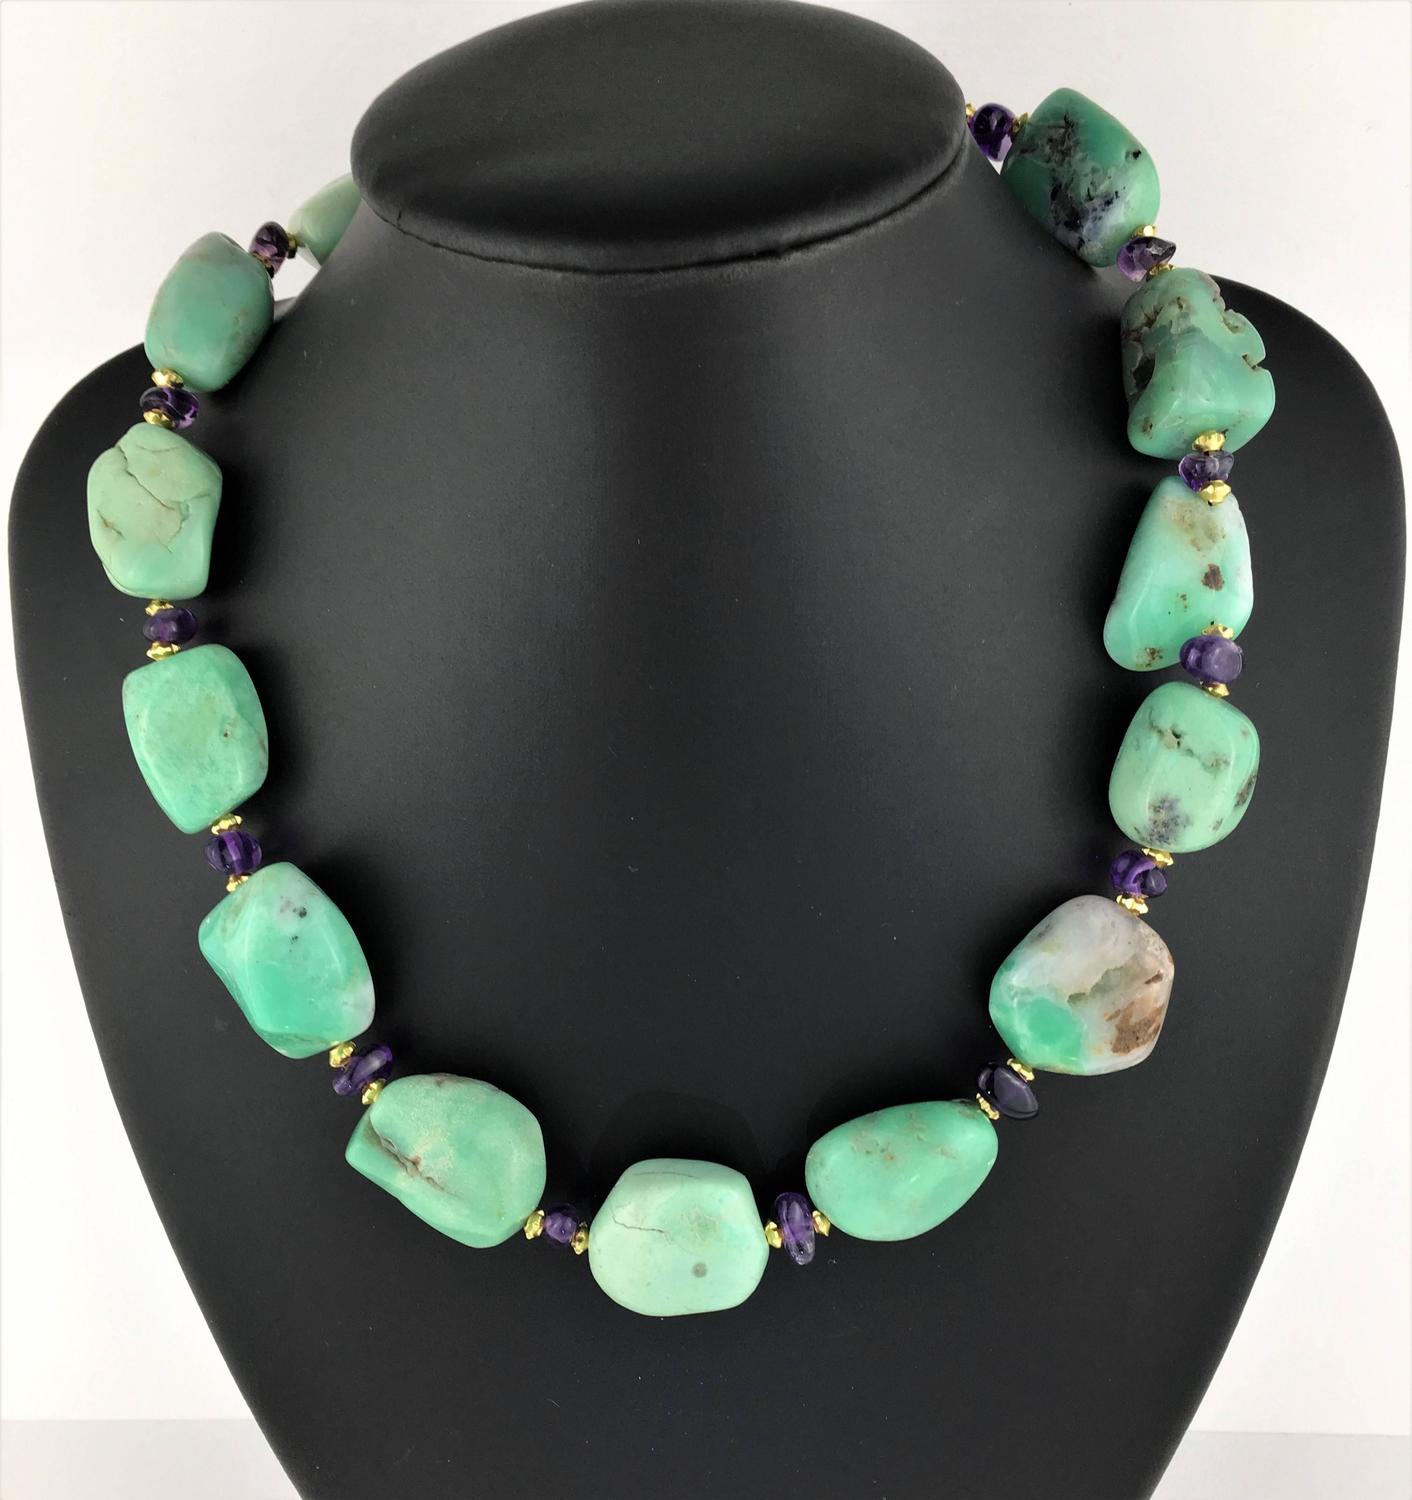 Polished Chrysoprase Nugget and Amethyst Necklace For Sale at 1stdibs